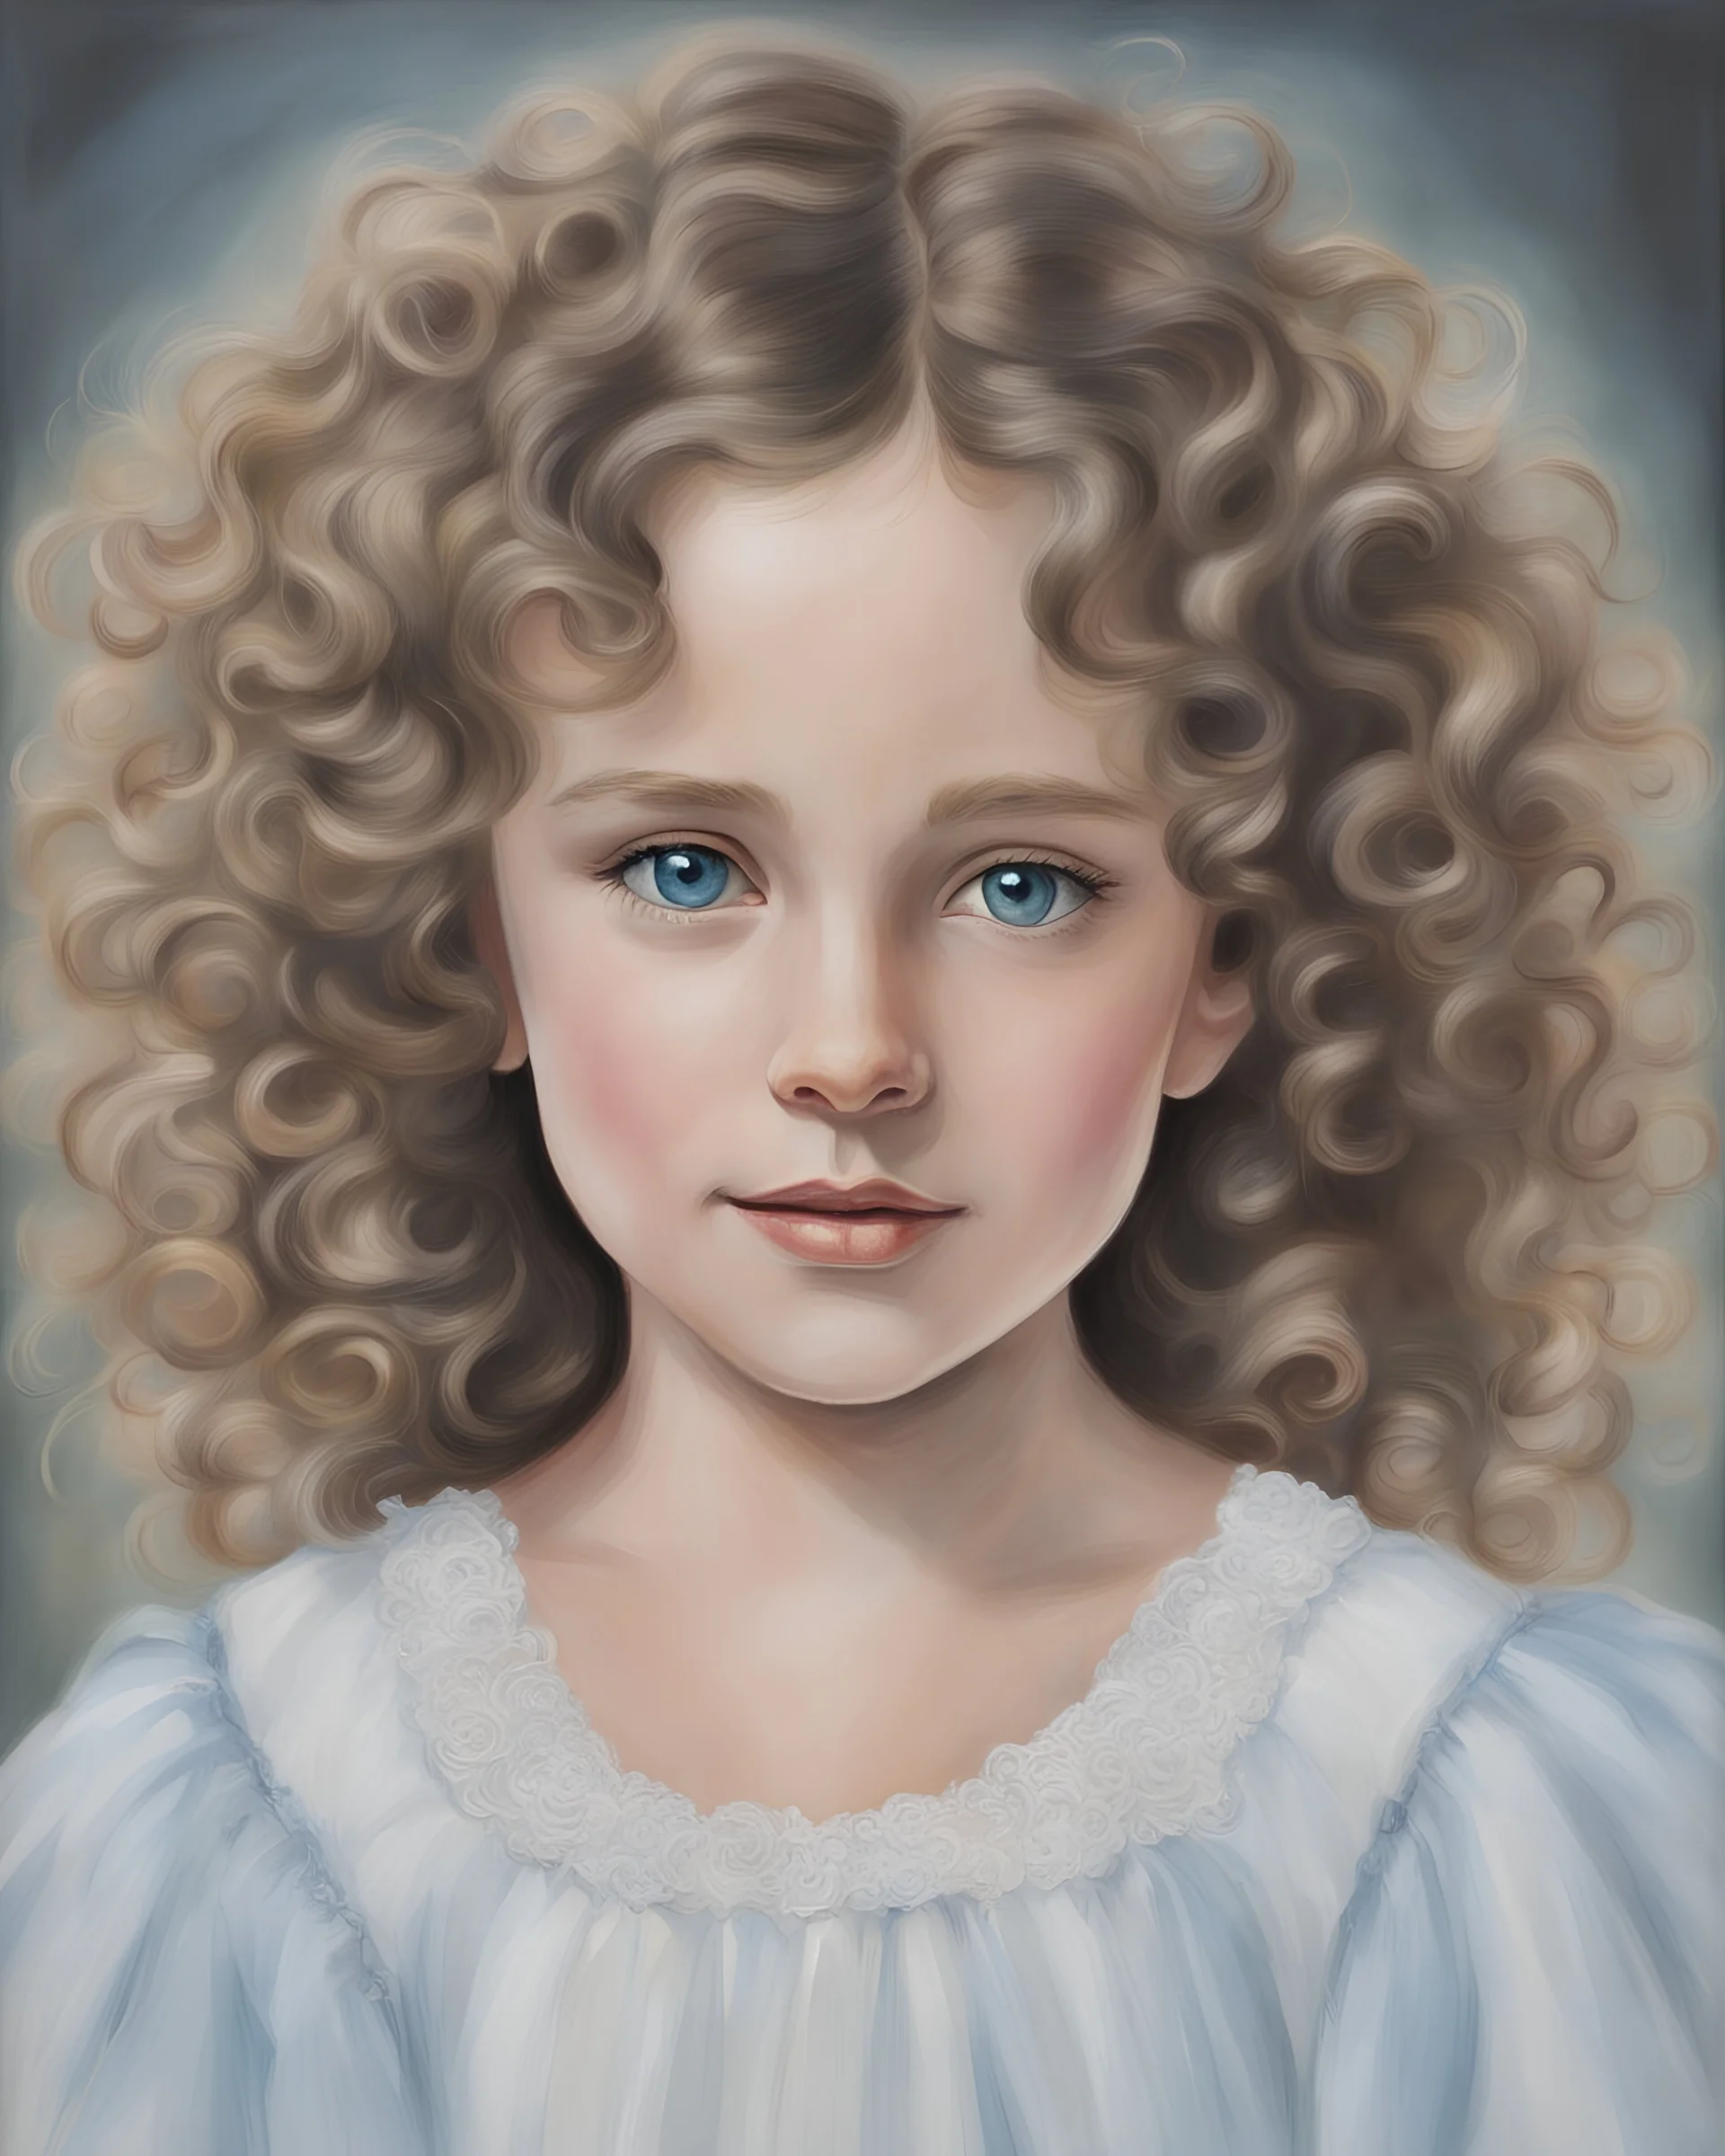 self portrait of brunette curly 11 year old with blue eyes and white dress